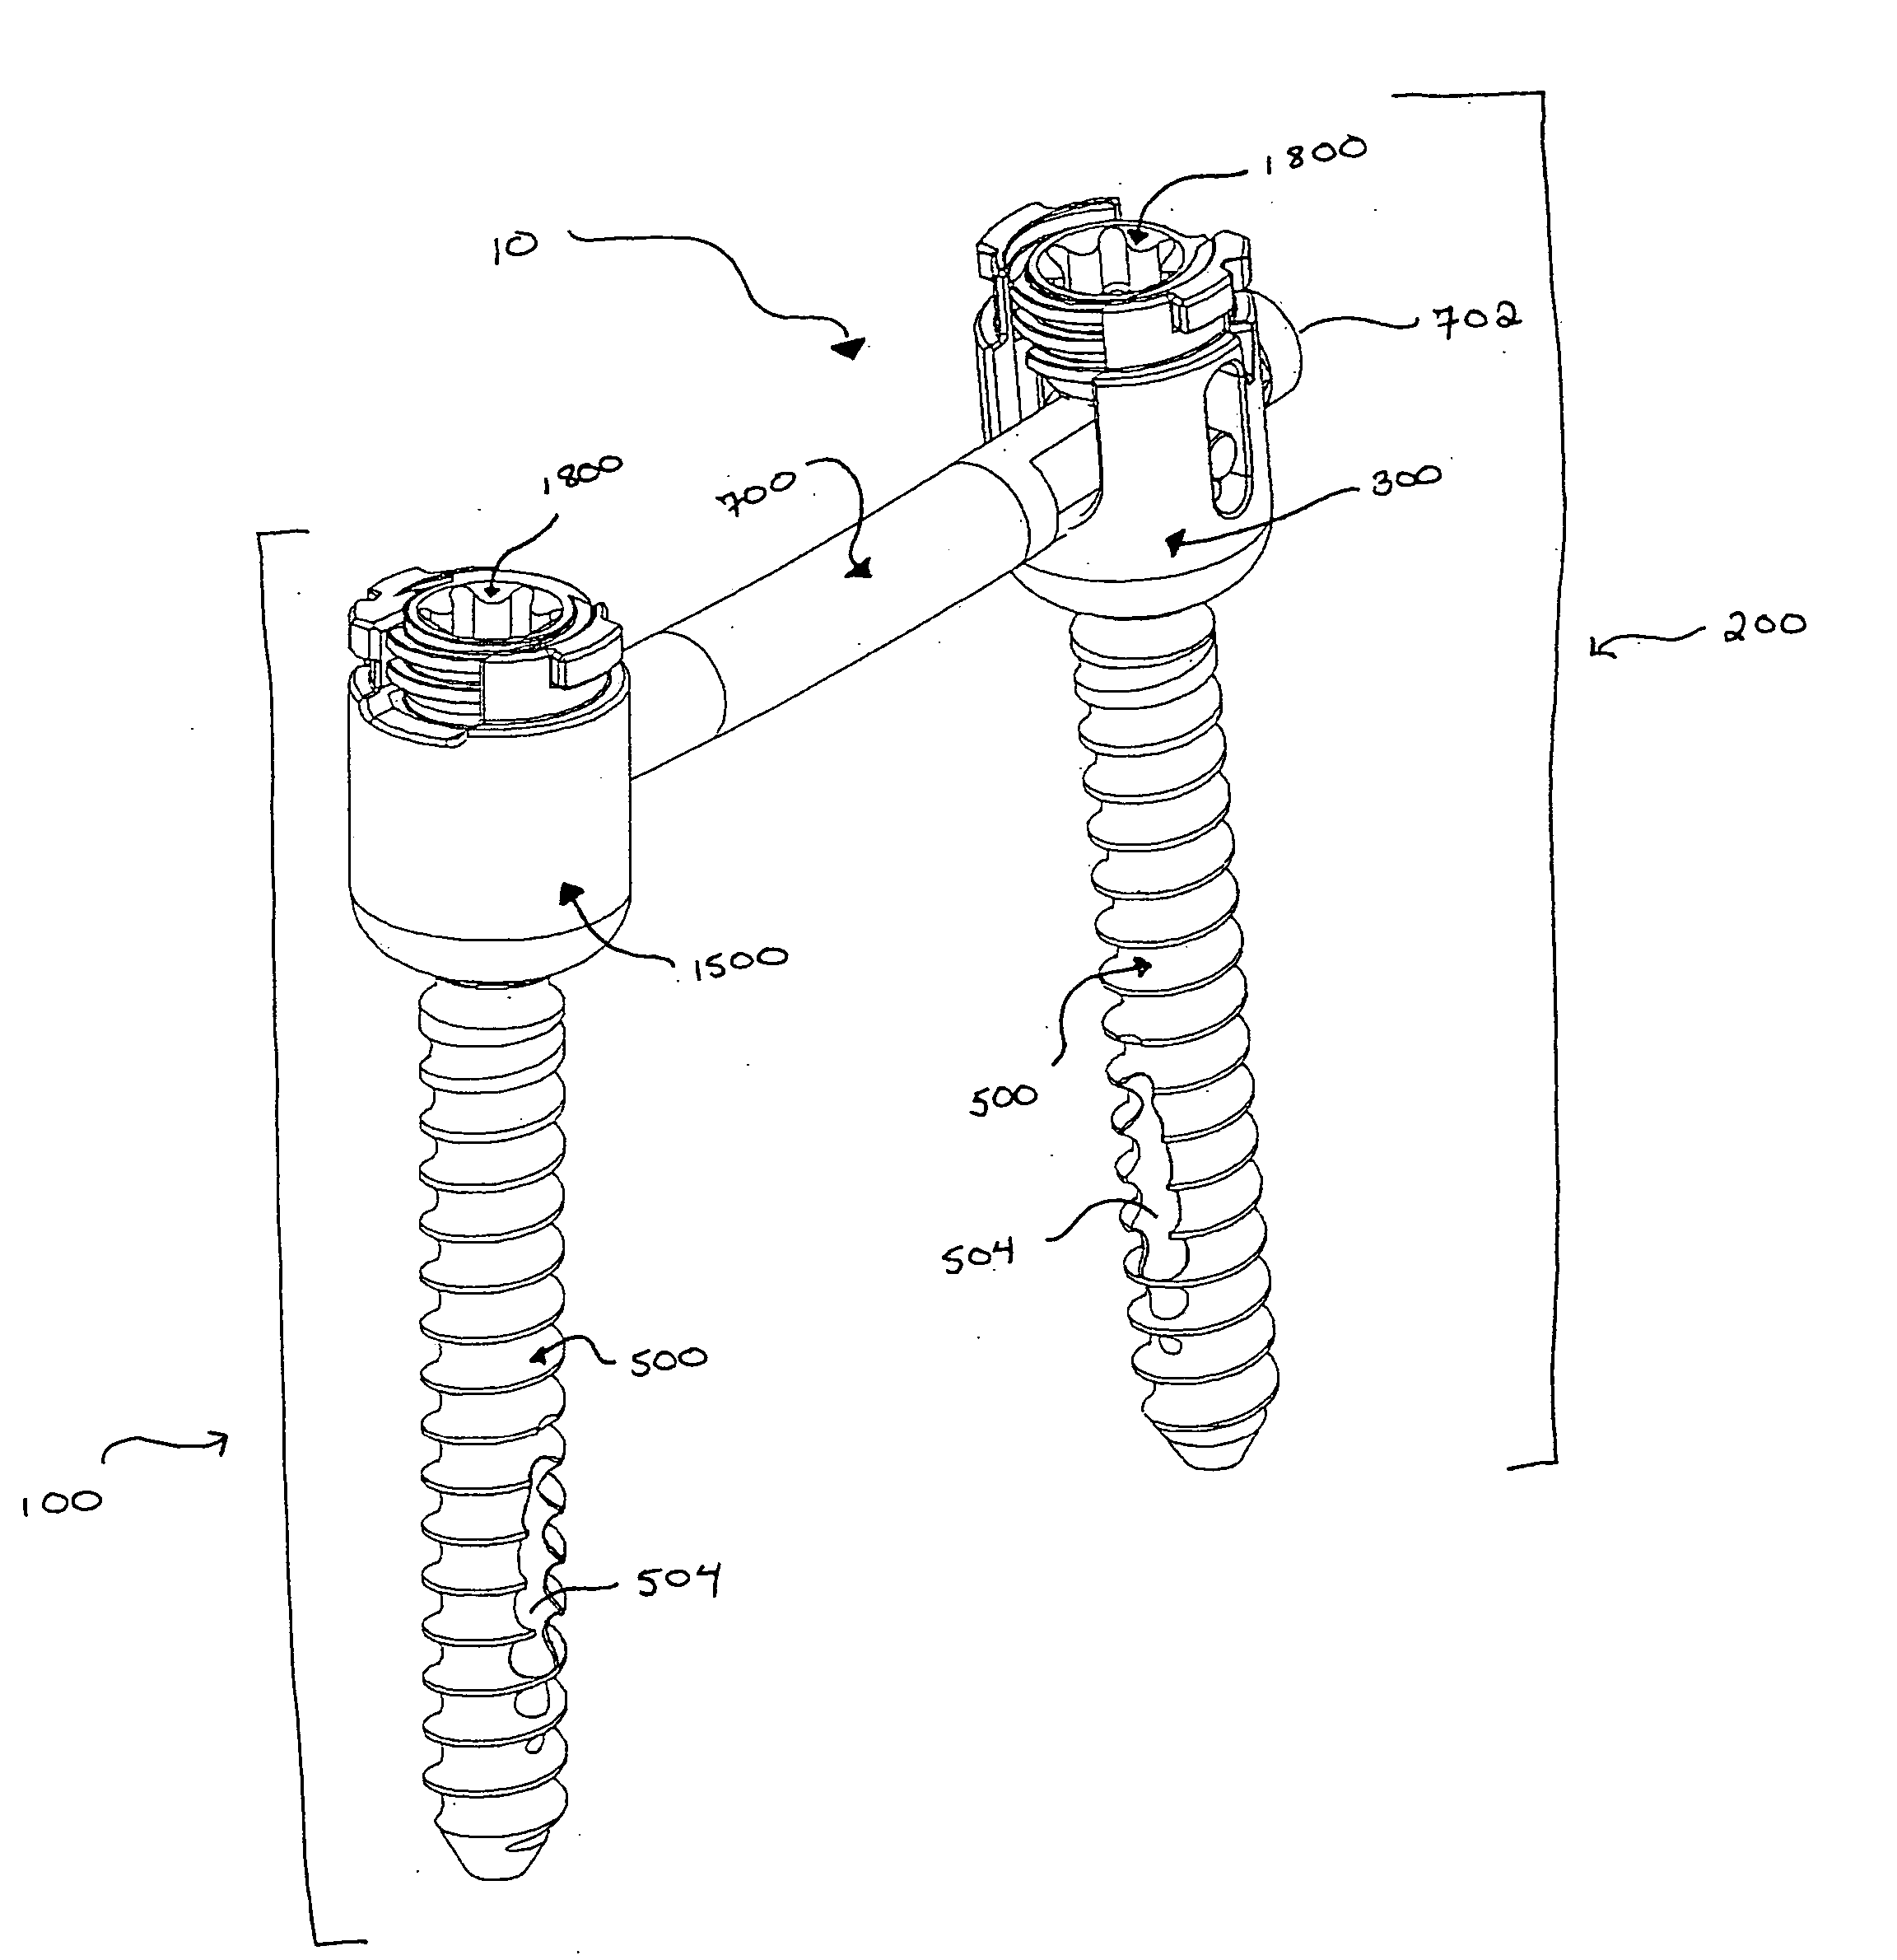 Implant assembly and method for use in an internal structure stabilization system